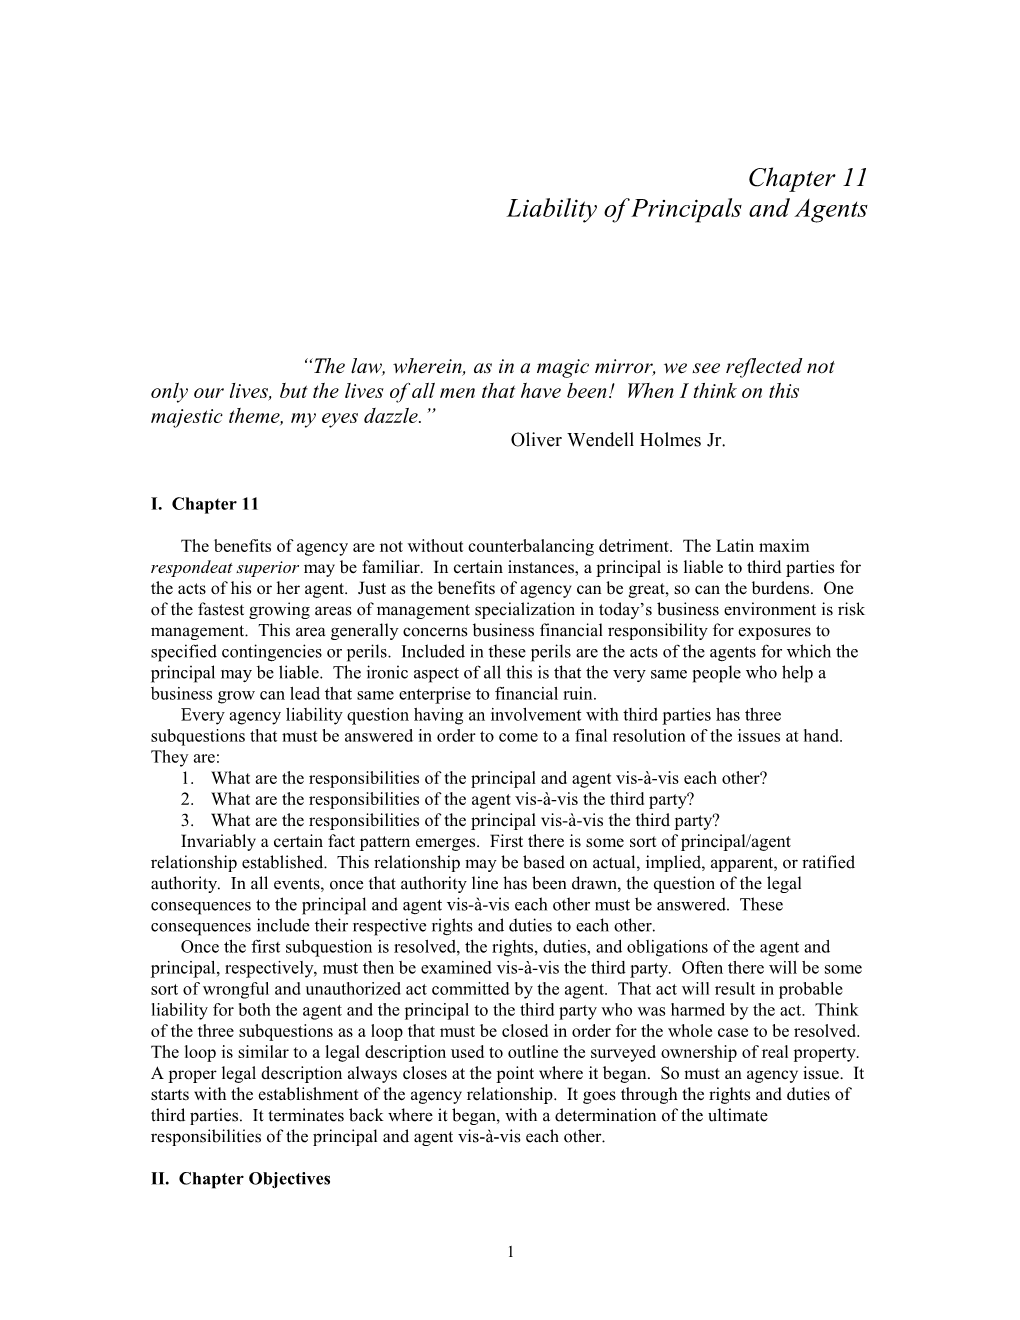 Liability of Principals and Agents